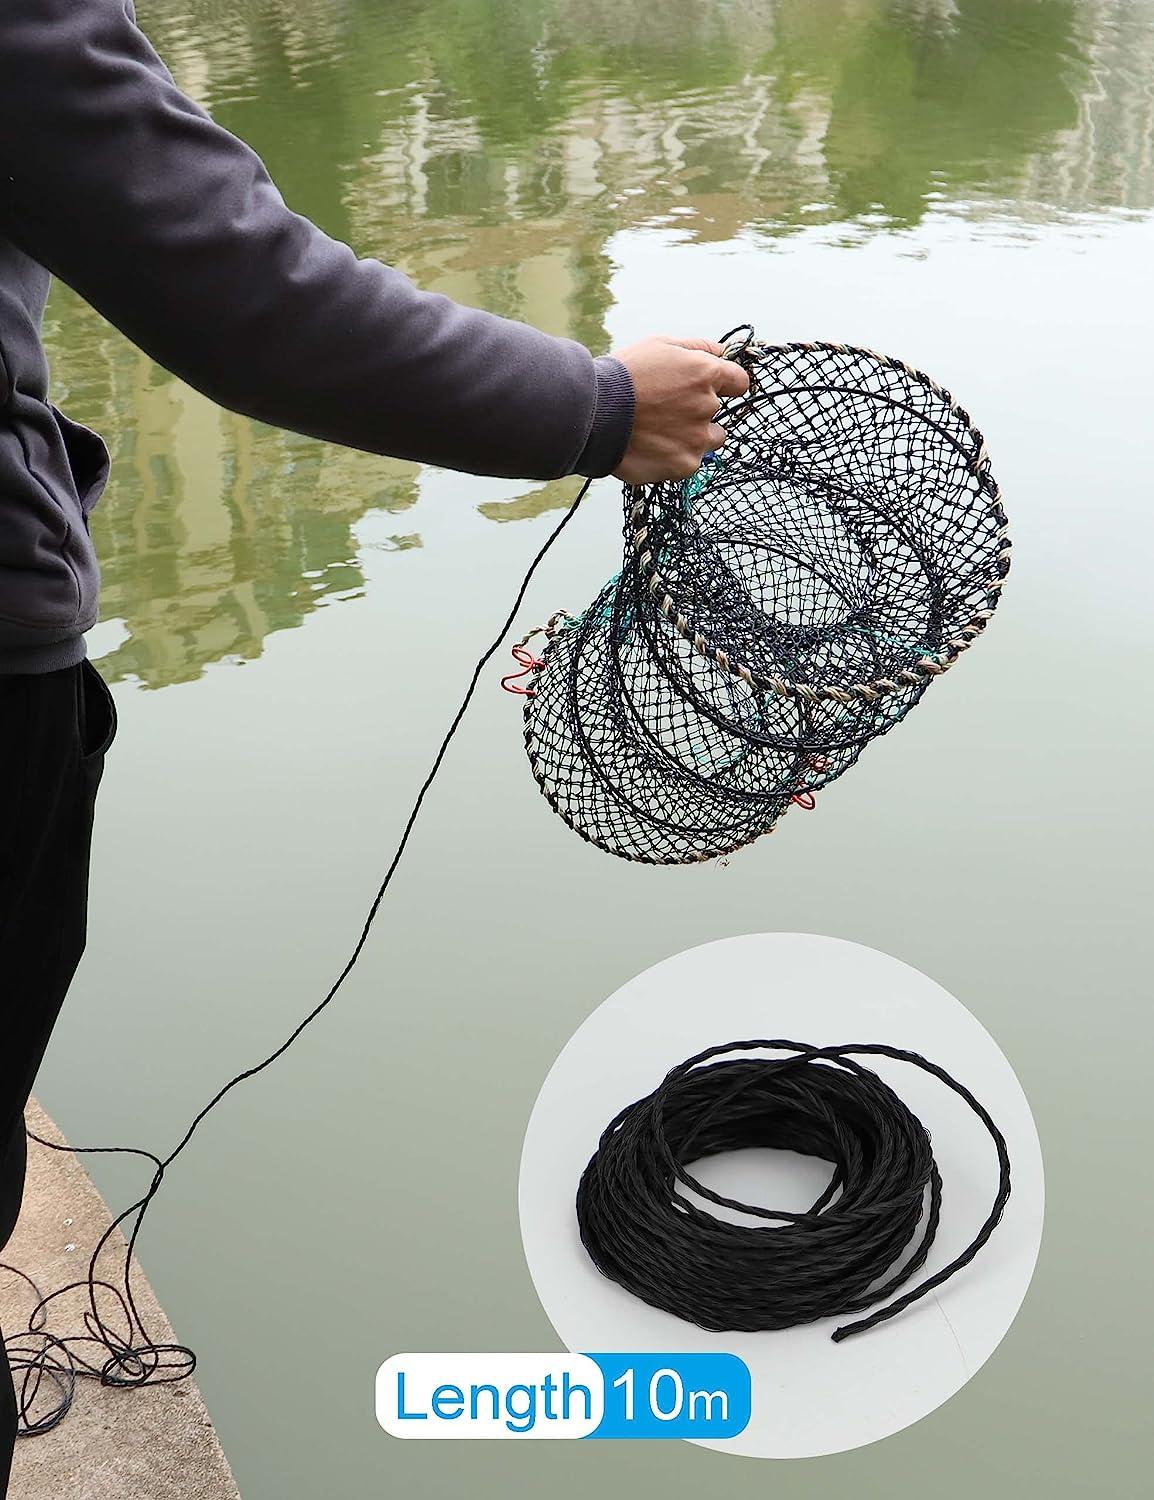 Hlotmeky Crab Trap Minnow Trap Fishing Bait Traps with 10m Hand Rope,  Folded Lobster Crawfish Fishing Net Trap